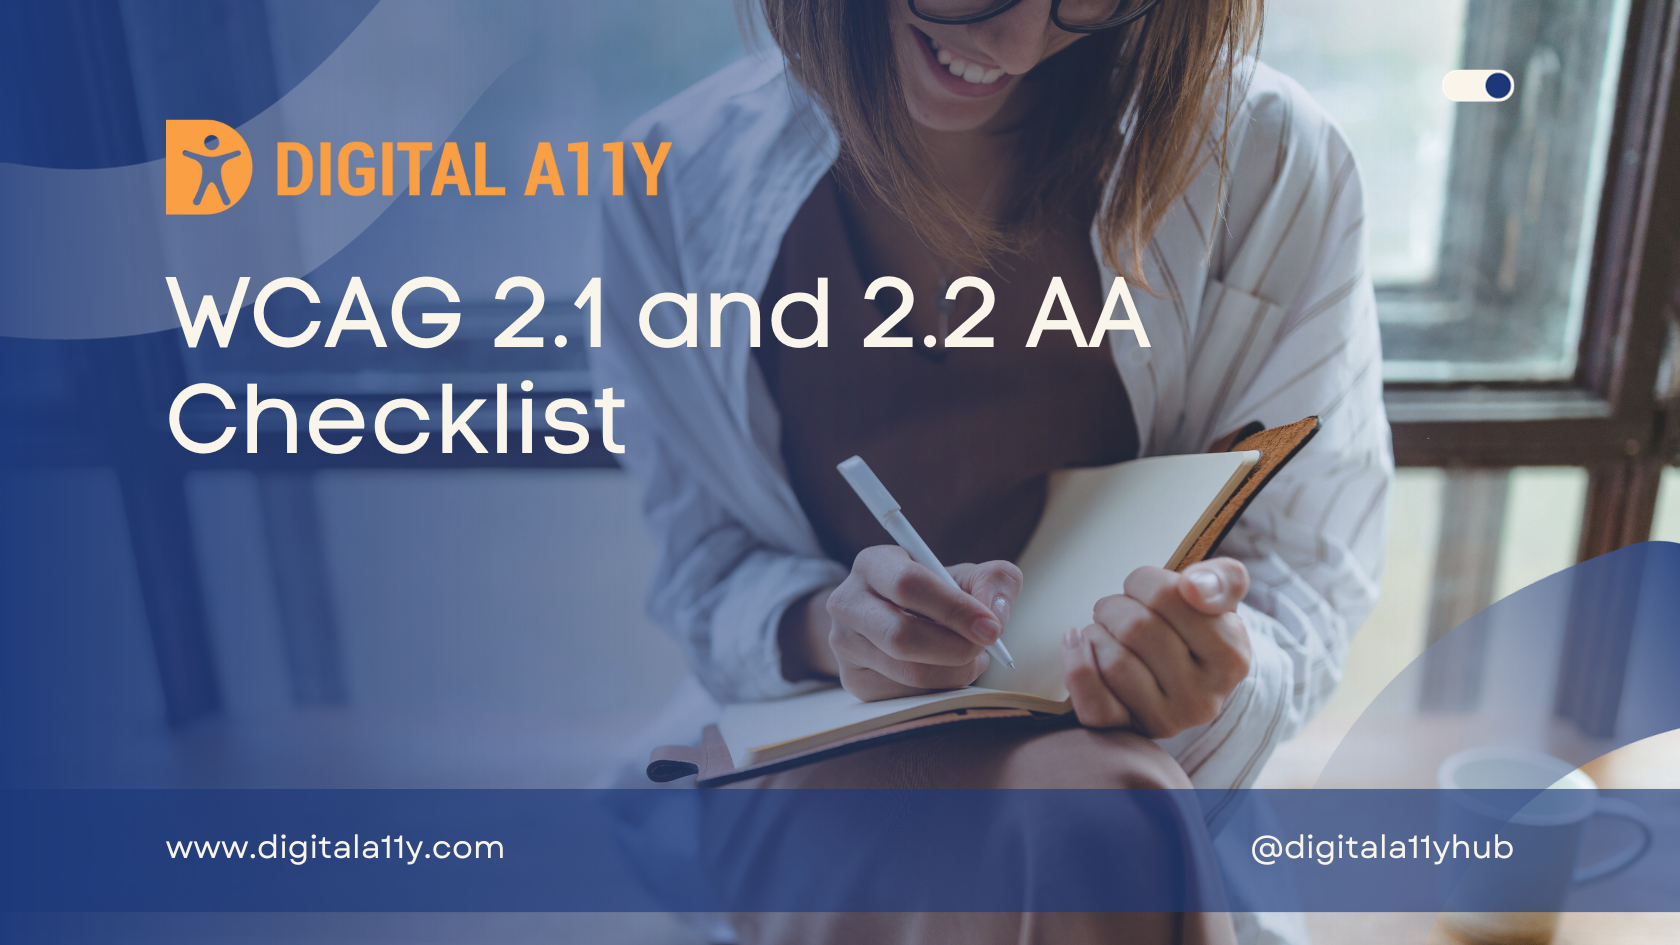 WCAG 2.1 and 2.2 AA Checklist